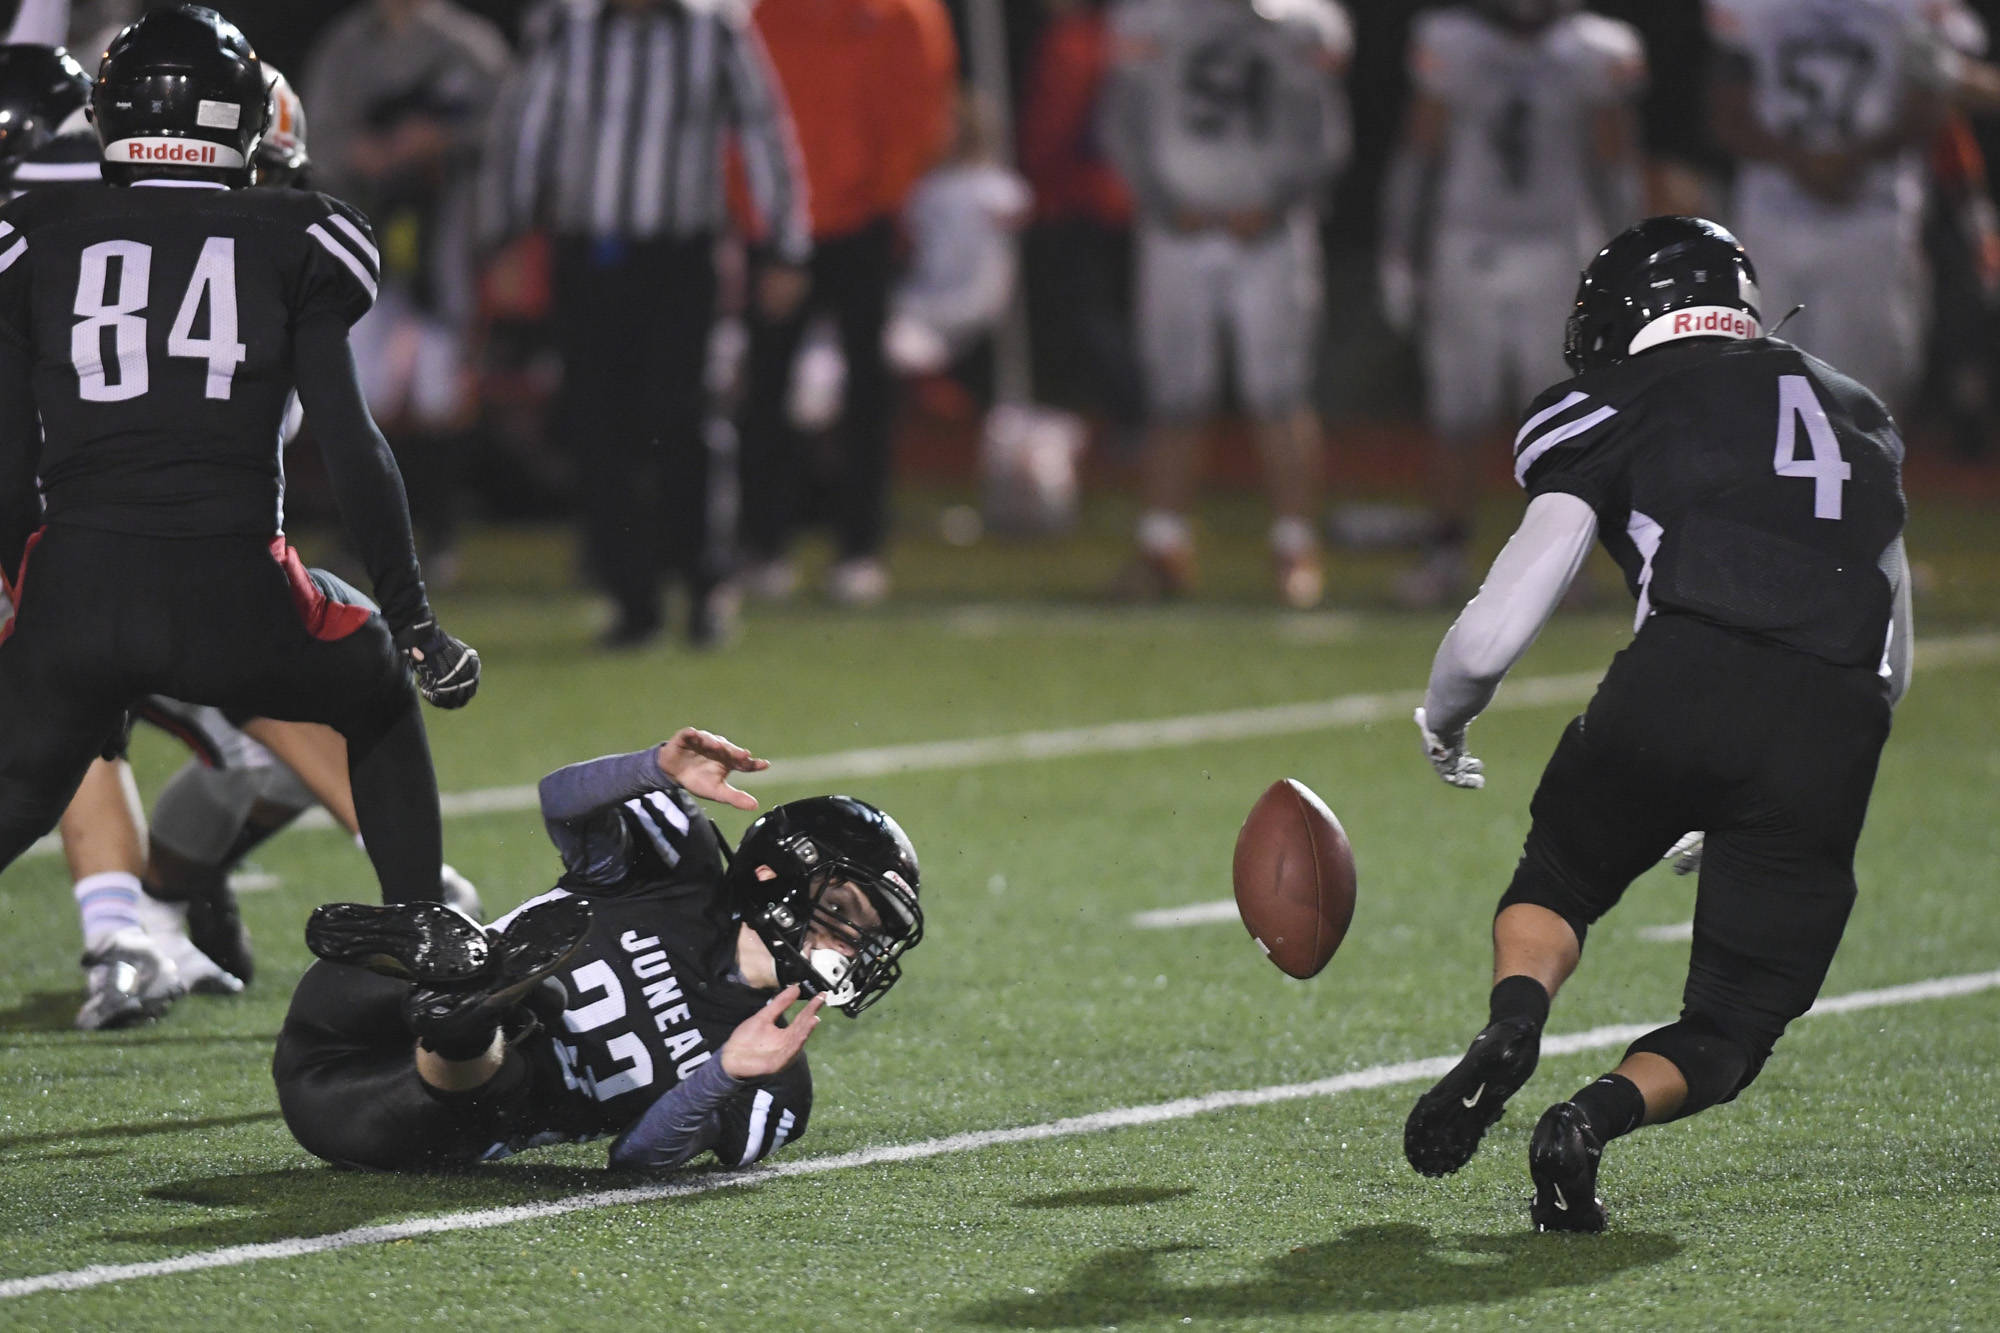 Juneau’s Ali Beya, right, recovers a fumble by teammate James Connally in the third quarter against West at Adair-Kennedy Memorial Field on Friday, Sept. 13, 2019. West won 43-14. (Michael Penn | Juneau Empire)